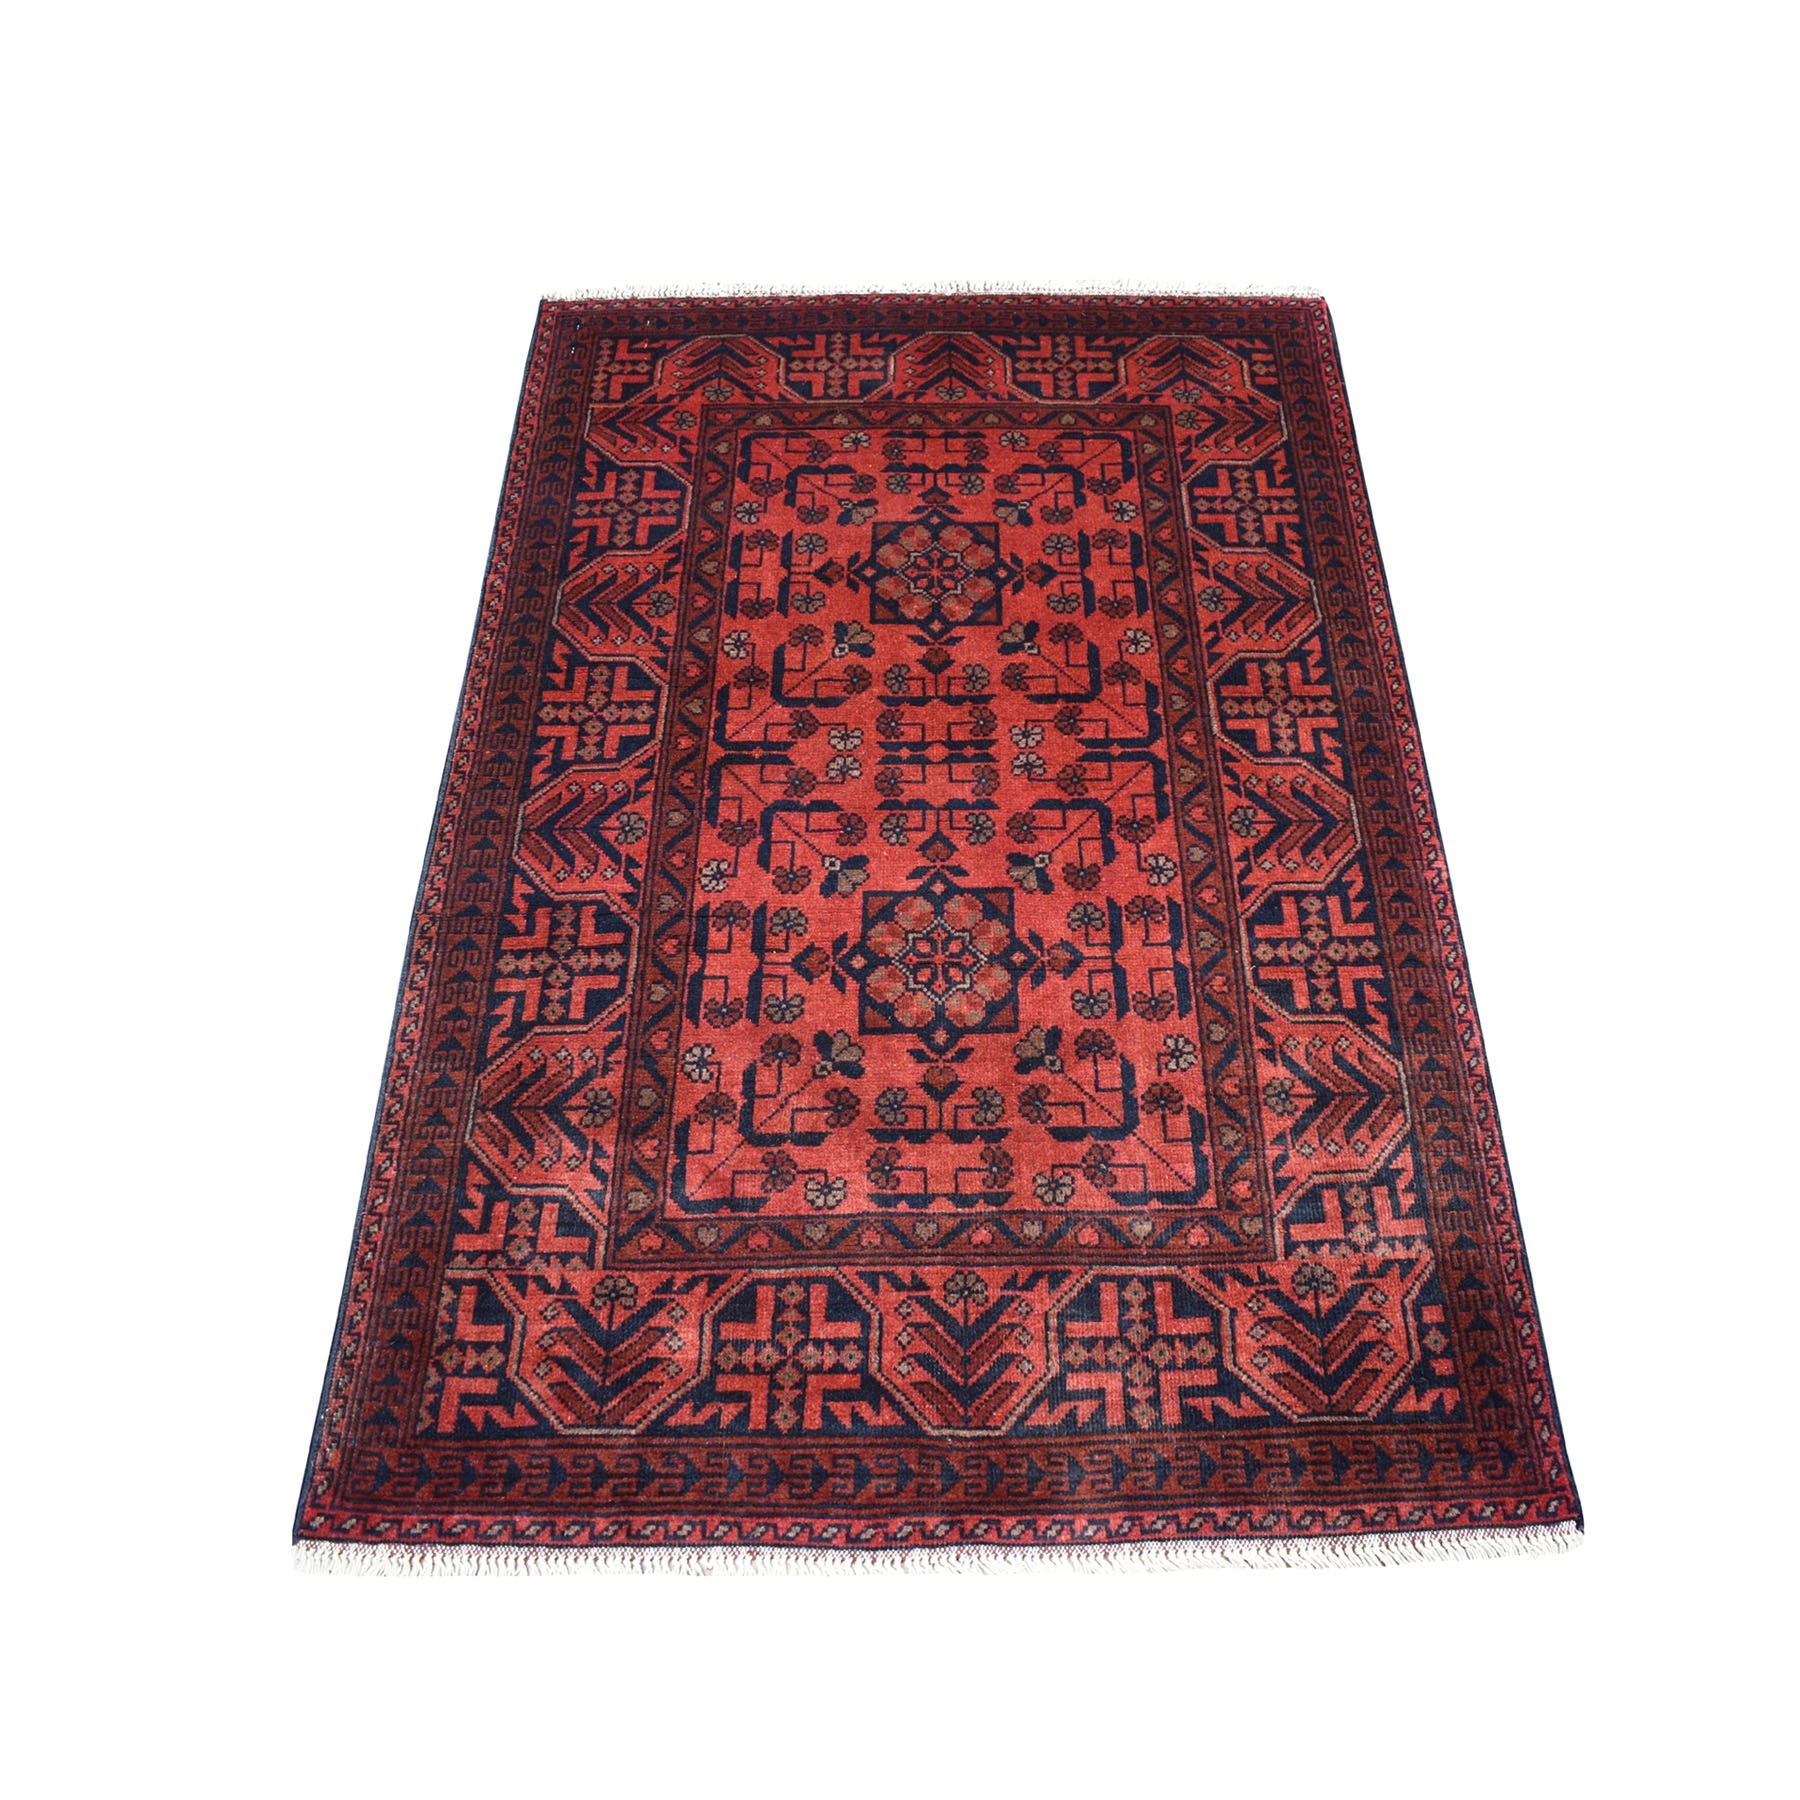 3'3"X5' Deep And Saturated Red Geometric Afghan Andkhoy Pure Wool Hand Knotted Oriental Rug moaec7a0